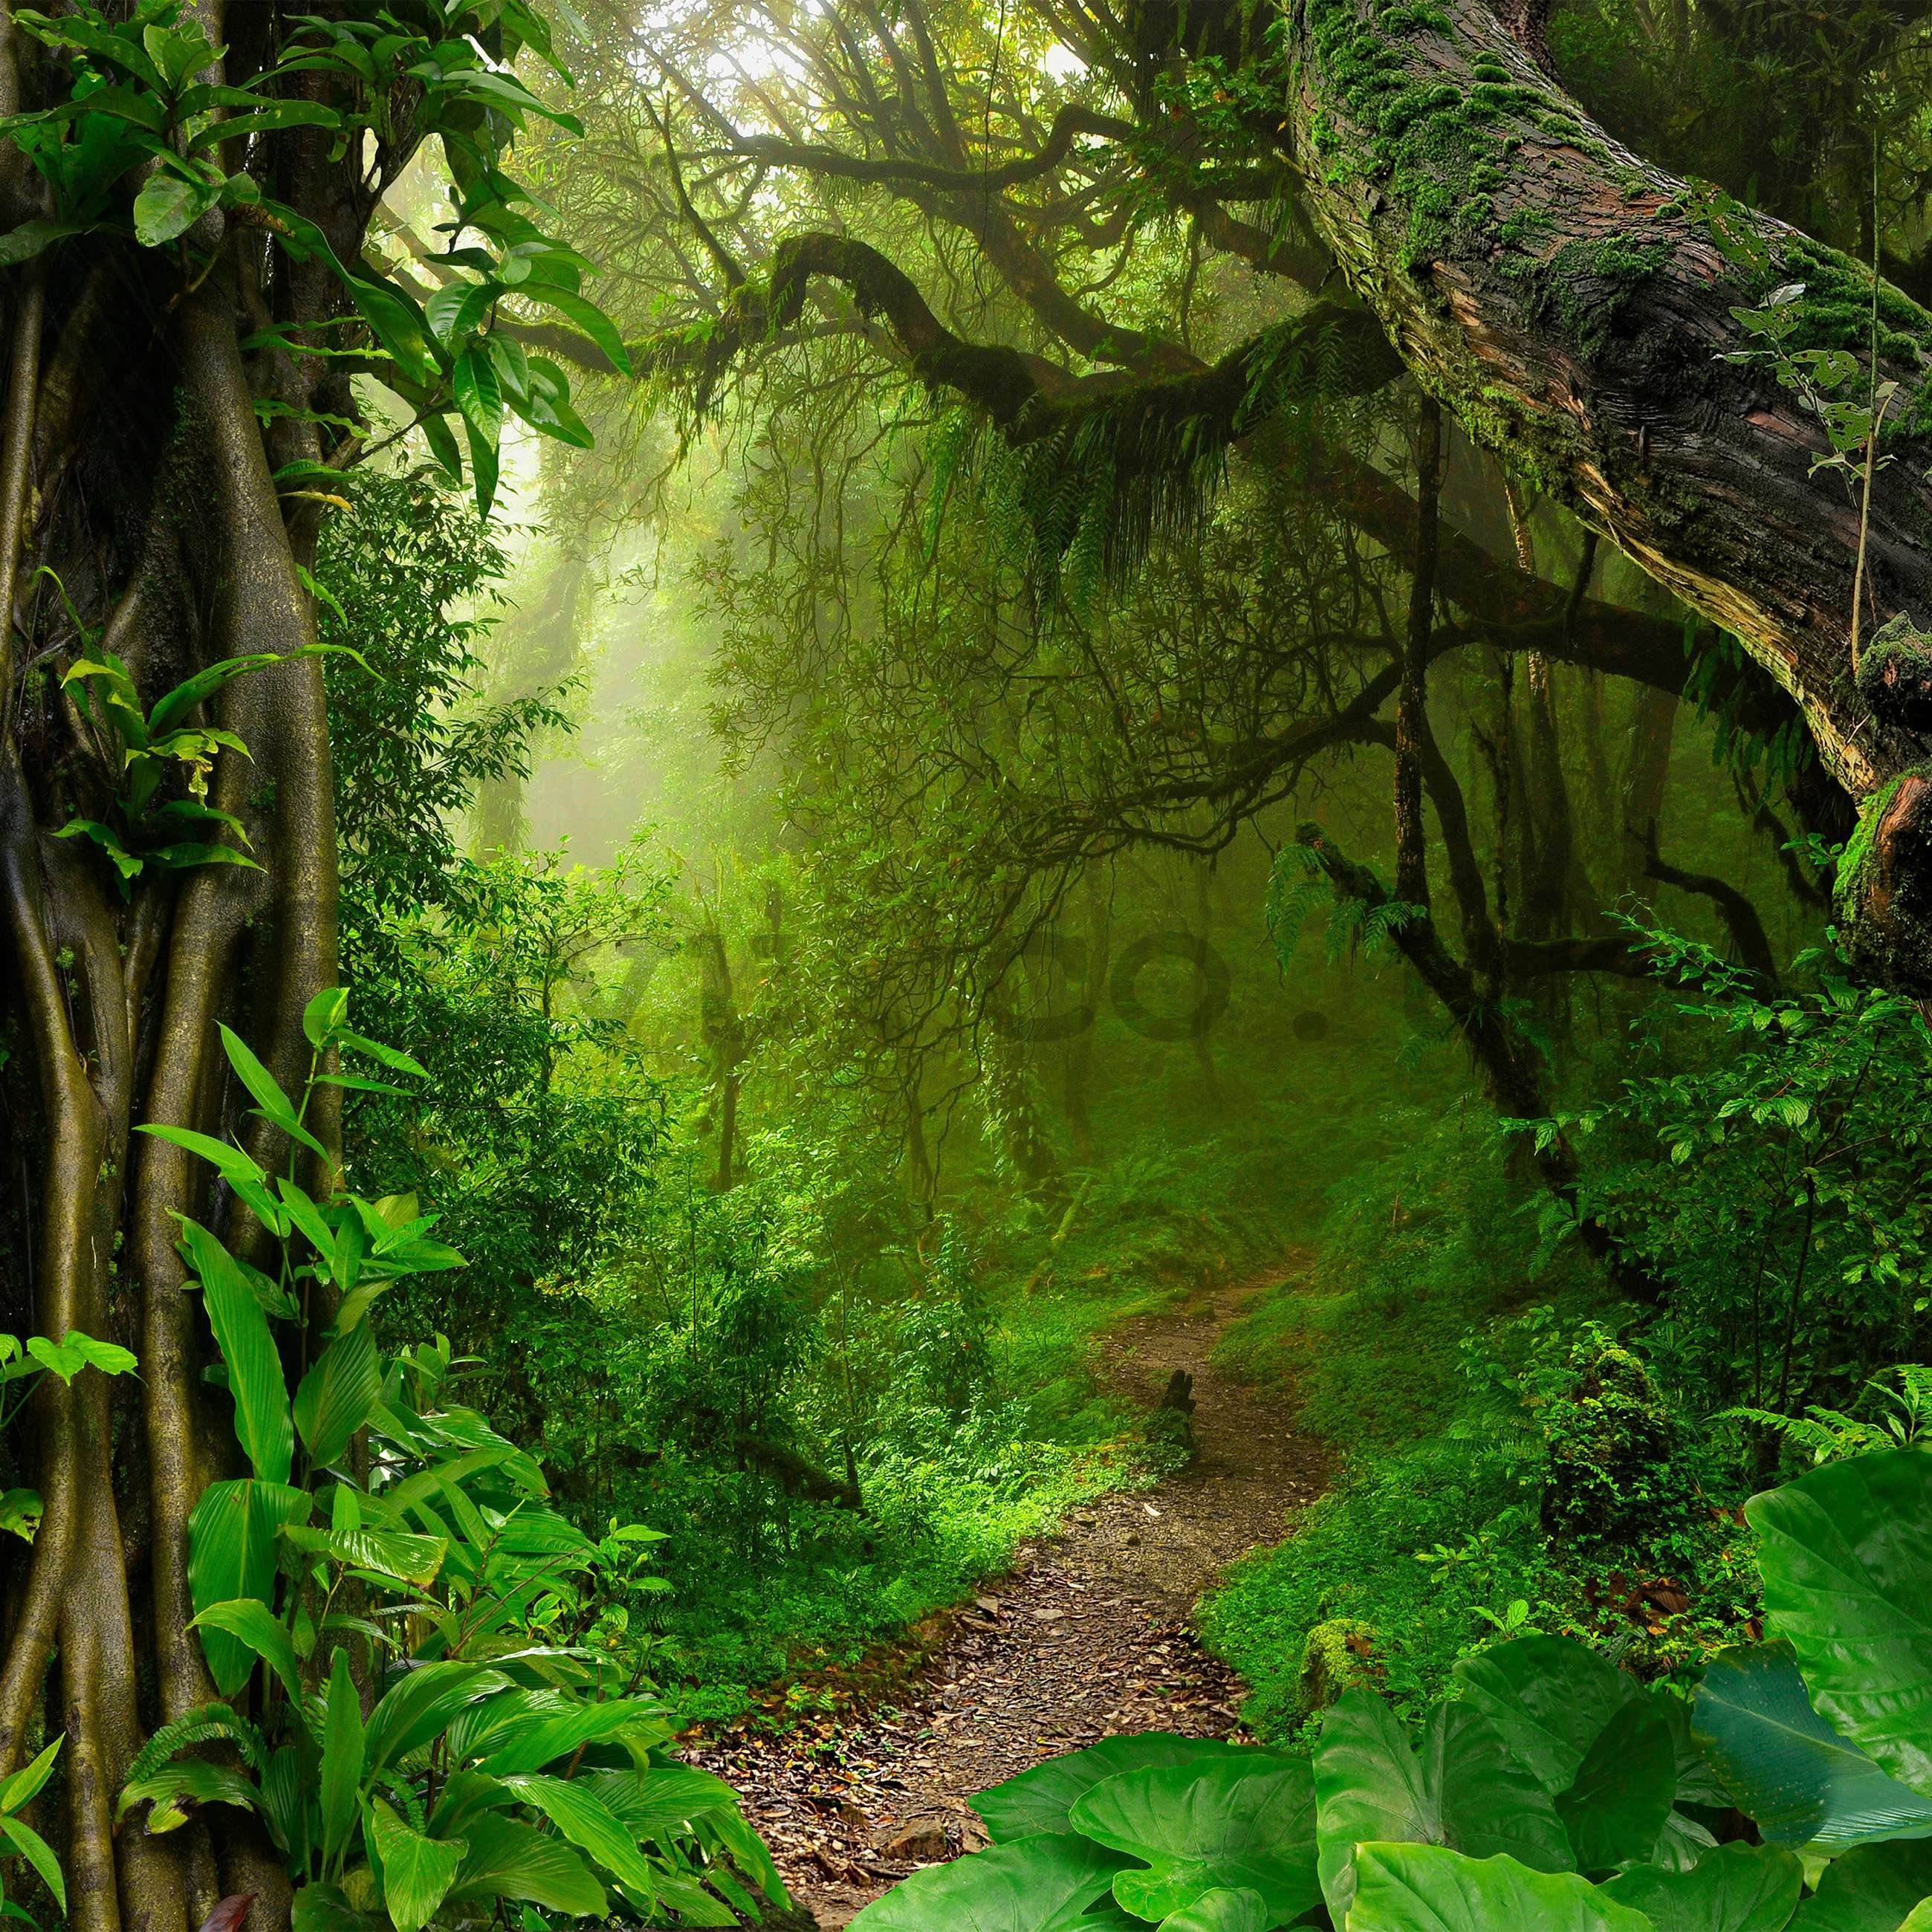 Wall mural vlies: Path in the forest - 416x254 cm